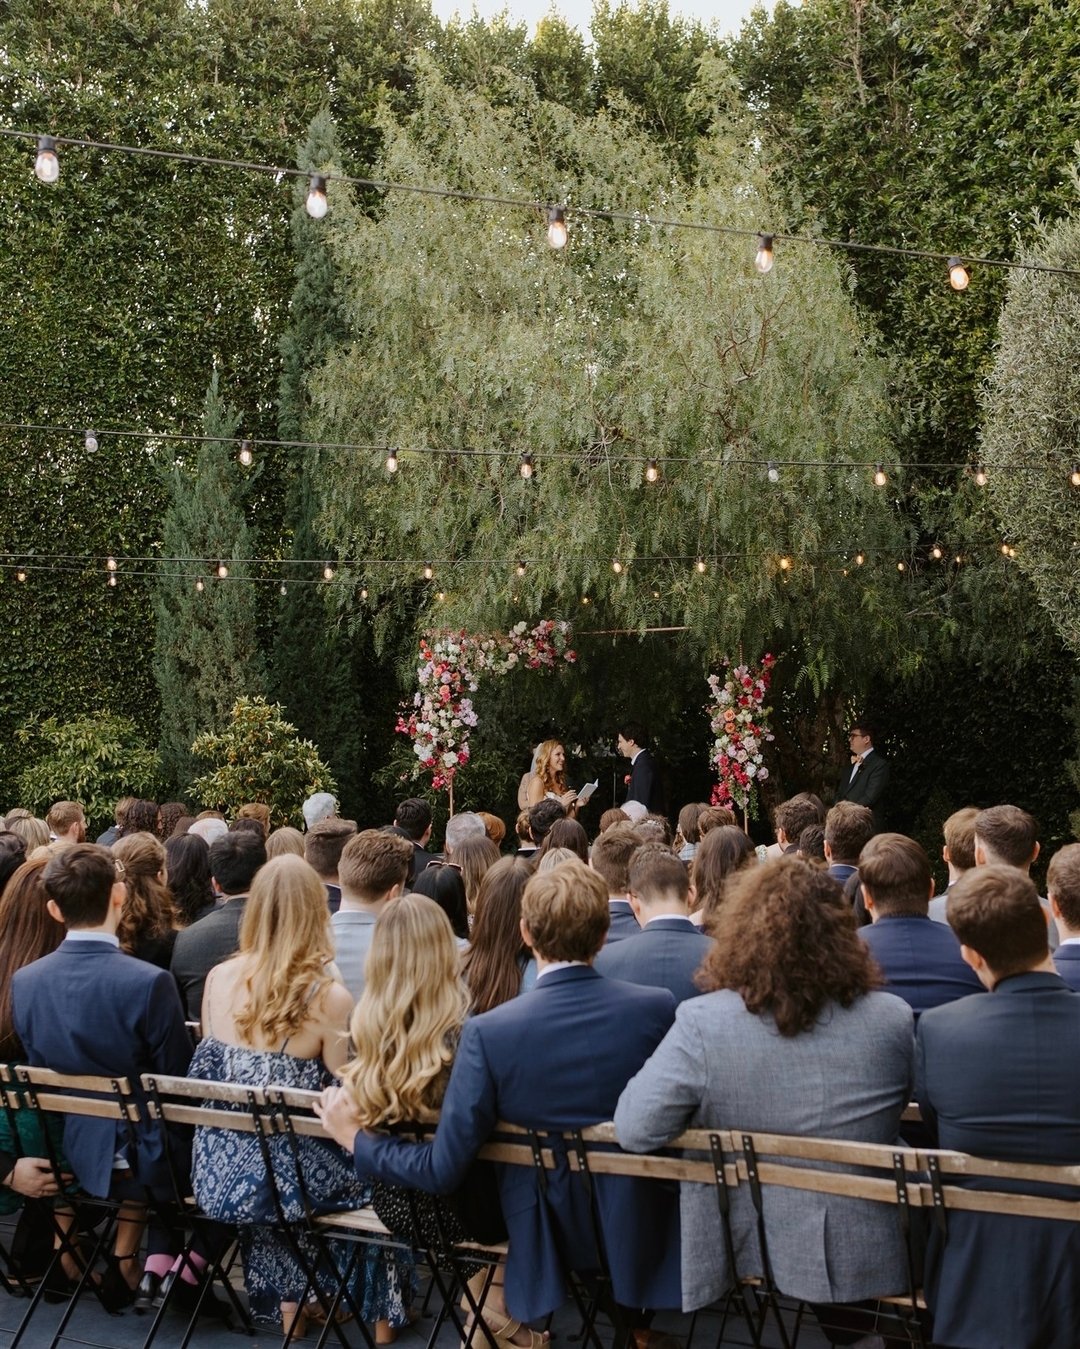 a fig house wedding feat. Sam + Adam

venue: @thefighouse
photography: @hannawalkowaik
coordination: @amyroseevents
florals: @thelittlebranch
catering: @roomforty
bartending: @pharmacie__
DJ: @voxdjs
videography: @honeybunchesofhotes
photo booth: @lu